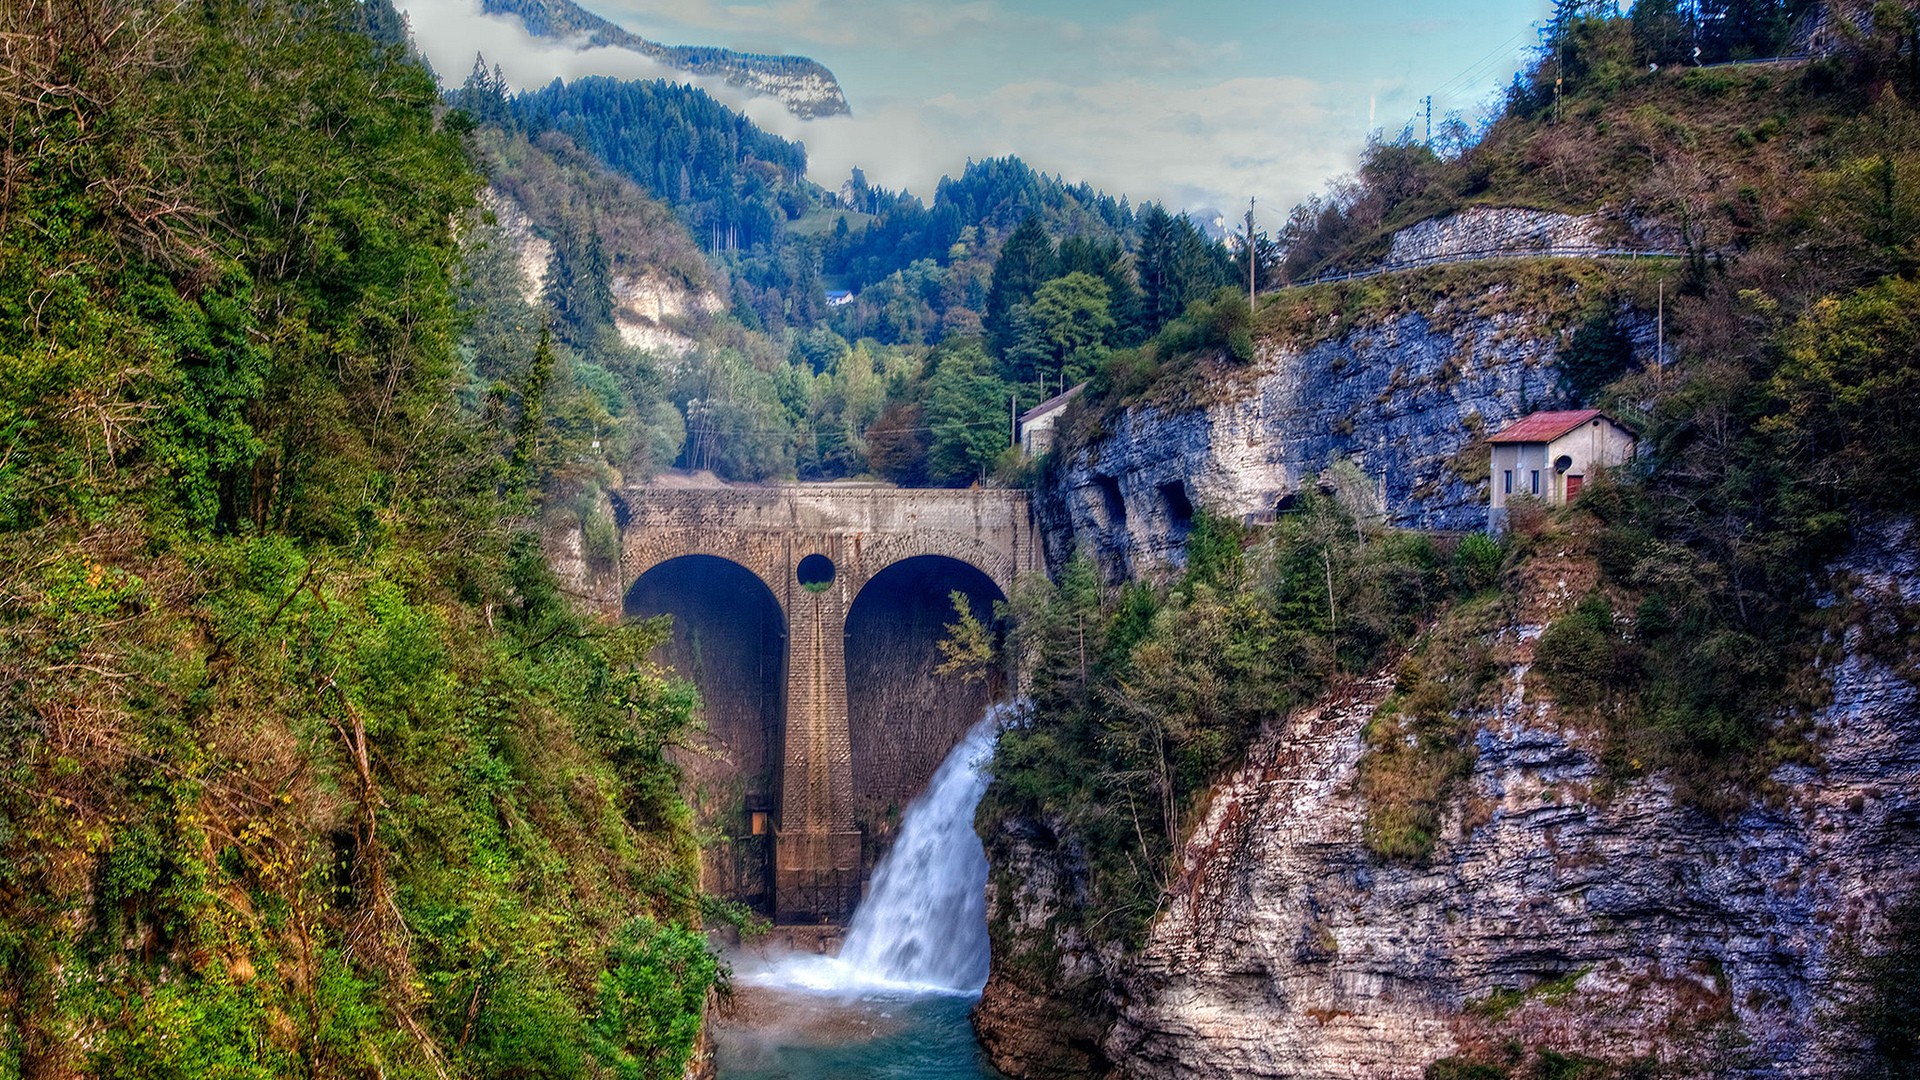 General 1920x1080 architecture bridge nature landscape waterfall trees forest rocks mountains clouds mist pine trees house dam